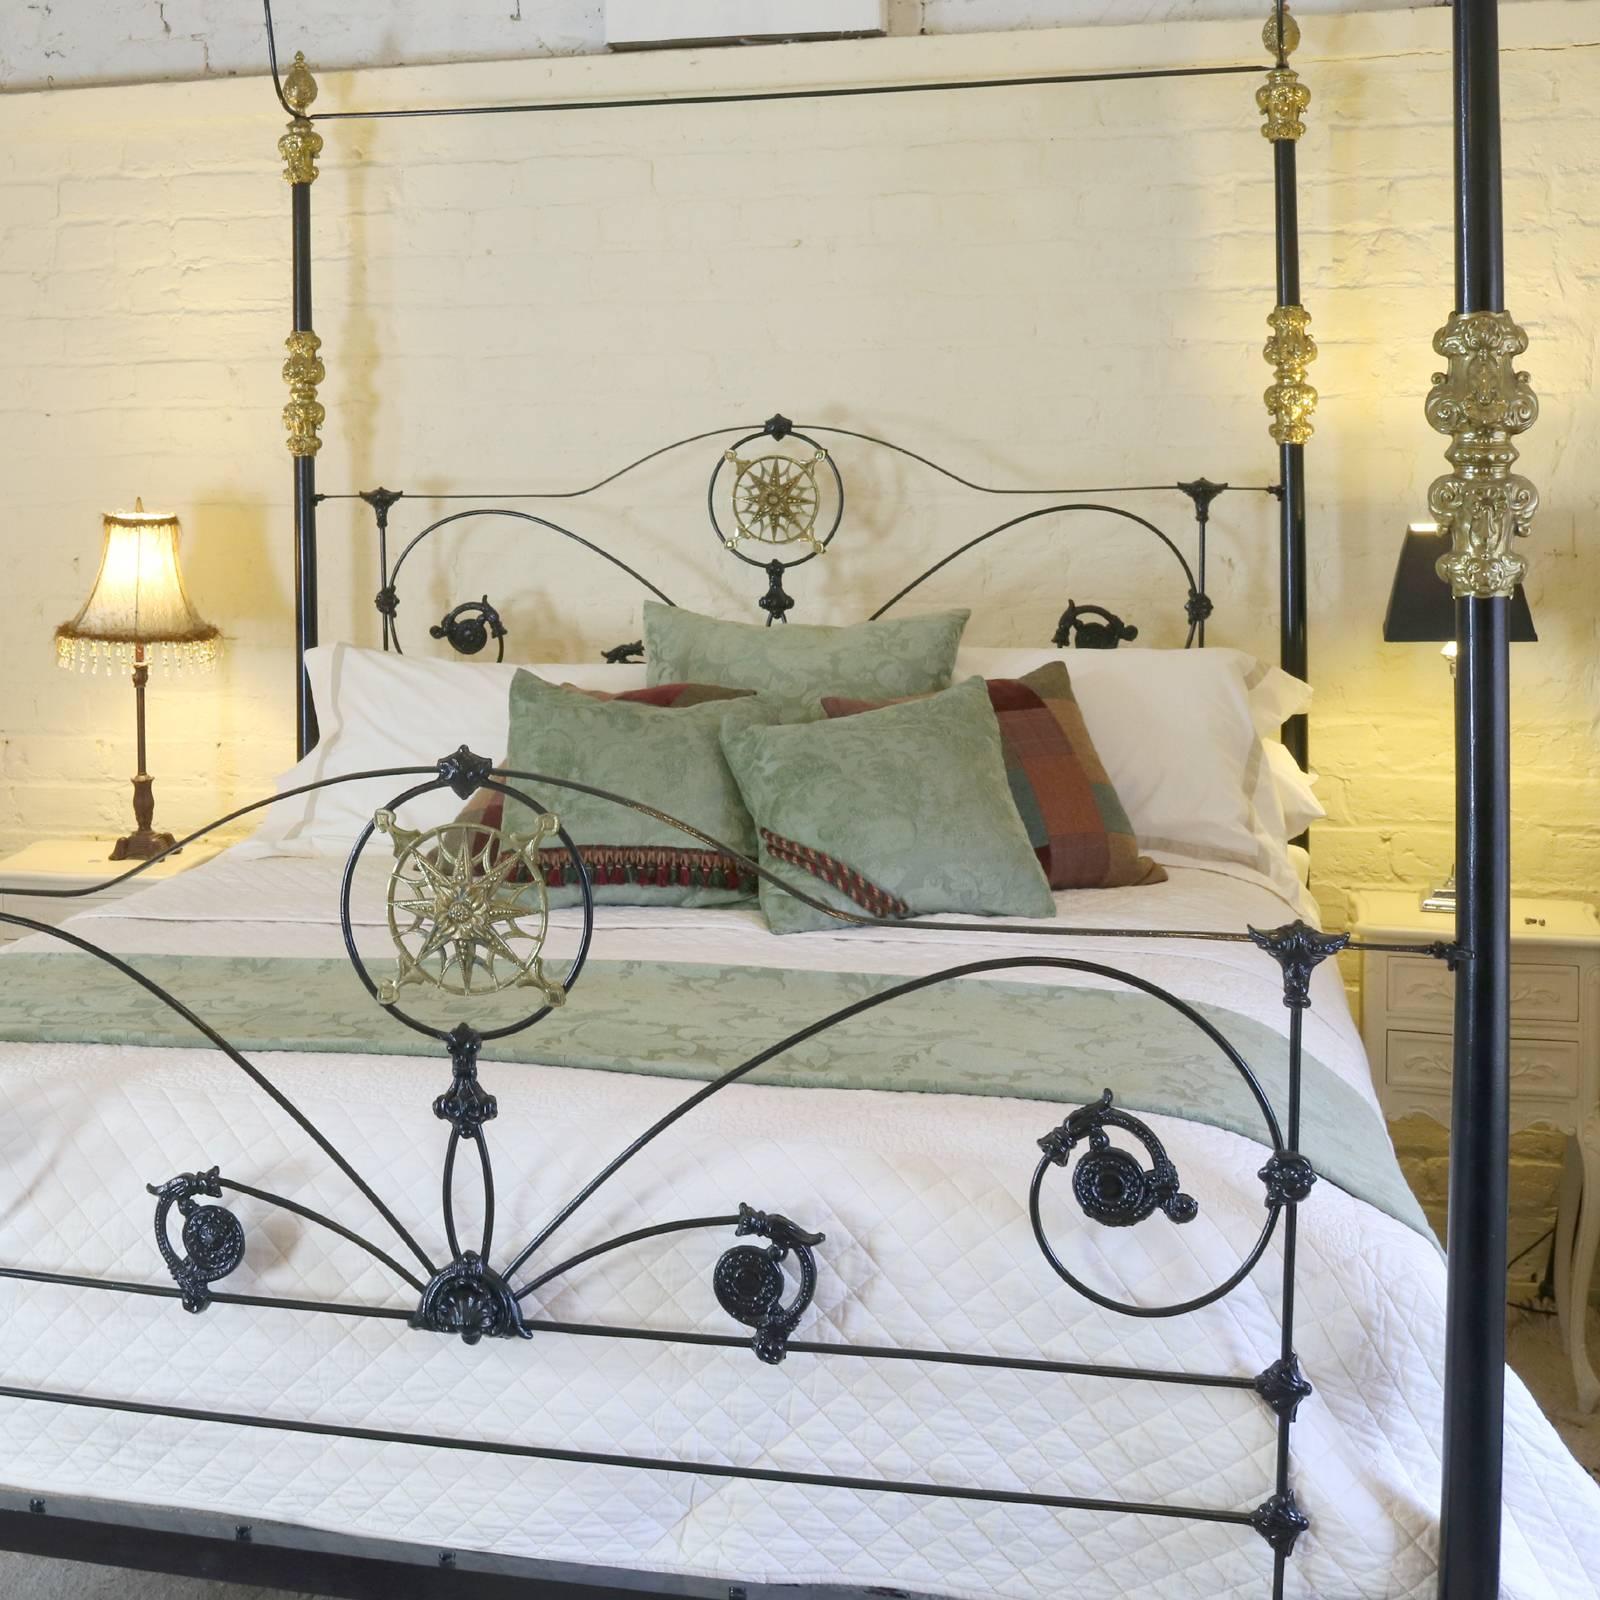 A superb cast iron four poster bed adapted from an original mid Victorian frame dating back to 1880 with cast central brass plaque, collars and finials. 

This four poster comes with the arched canopy as shown in the photographs or a straight